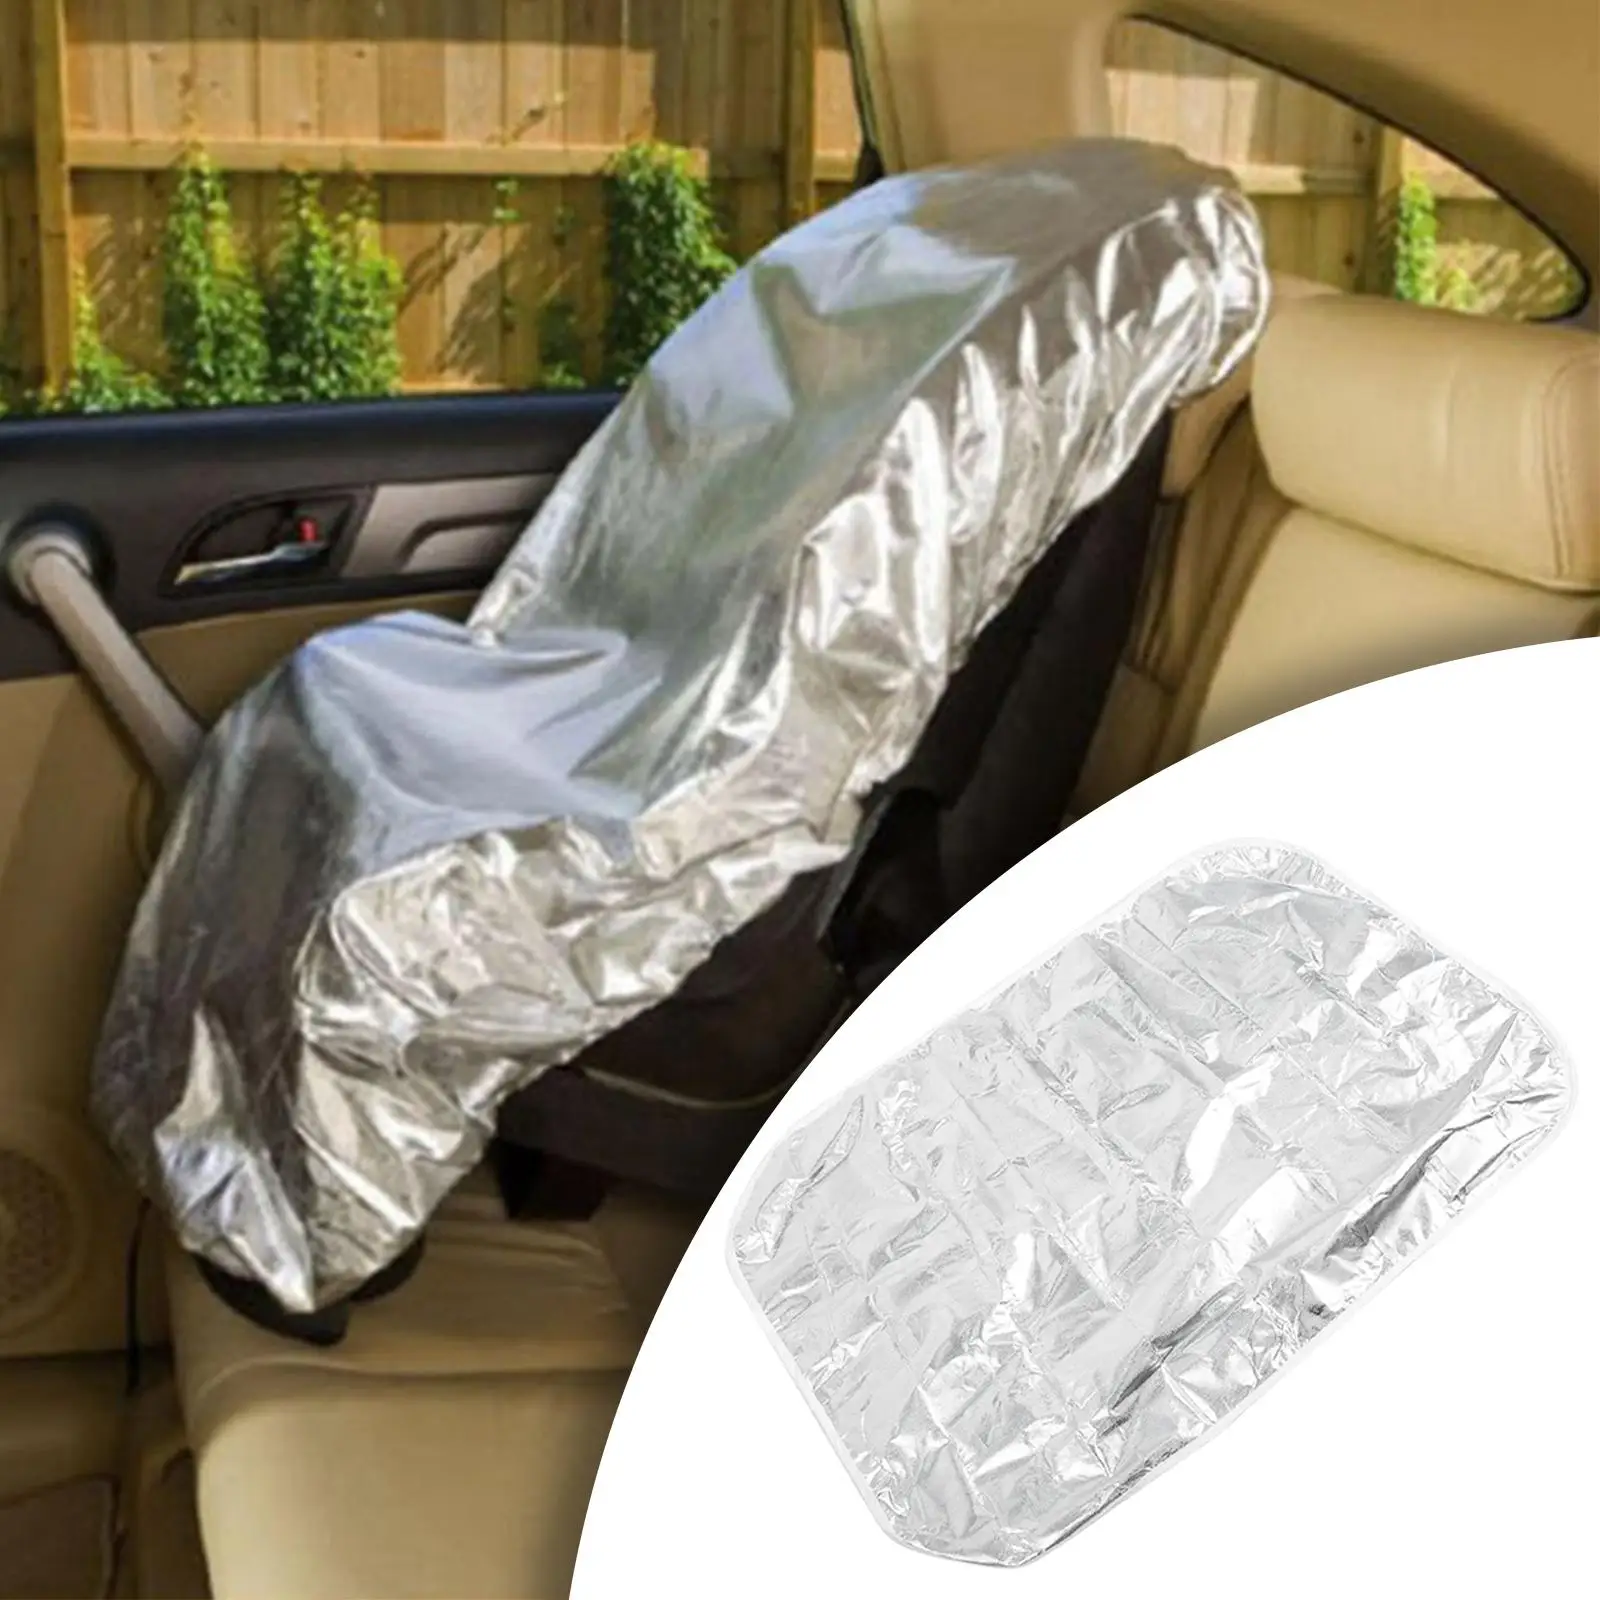 Auto Safety Seat Sun Shade Cover Hand Wash Safe Fit for Children Daily Use